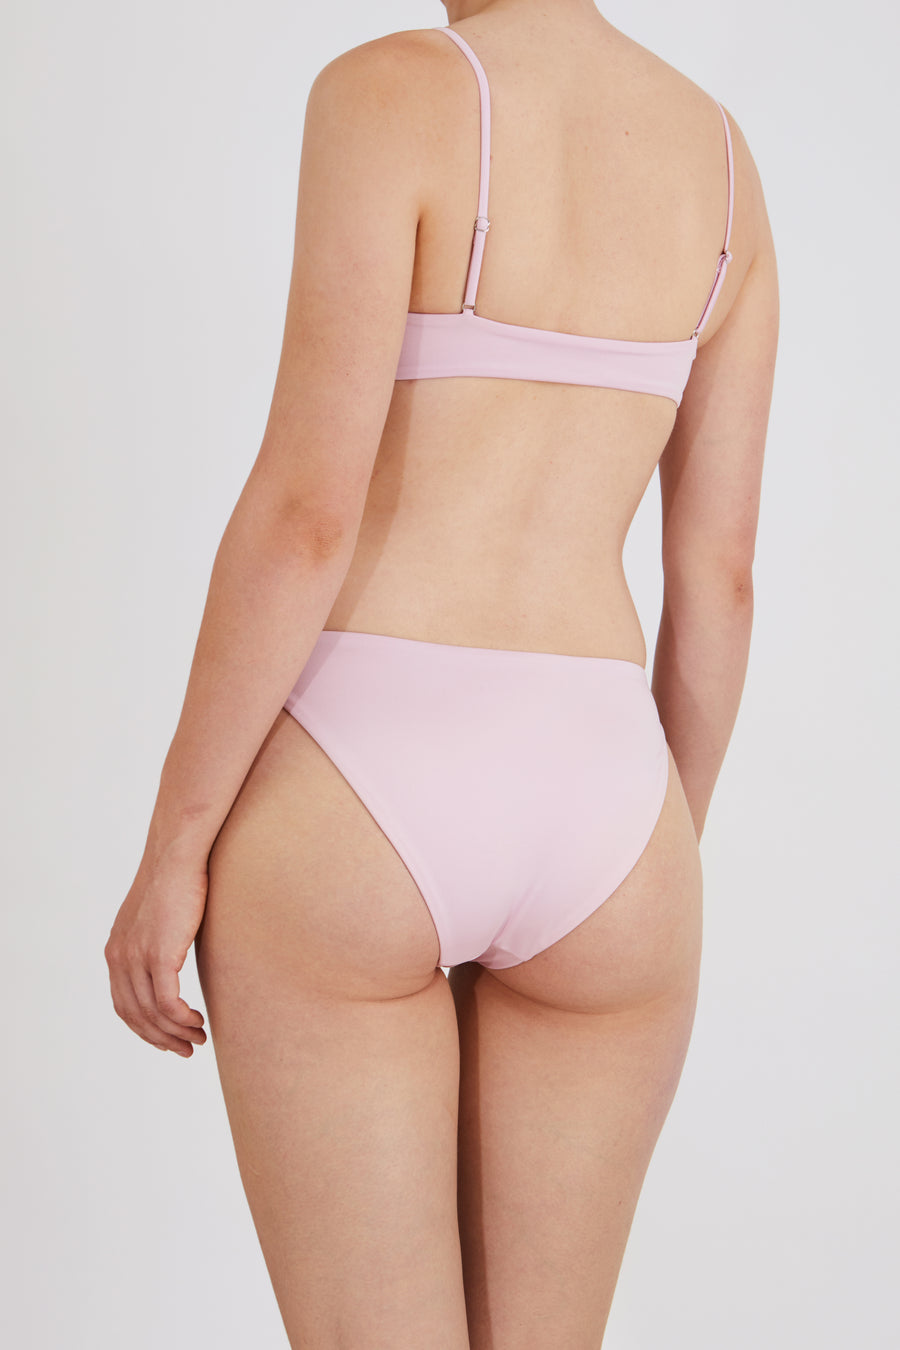 TOP – oval, pink